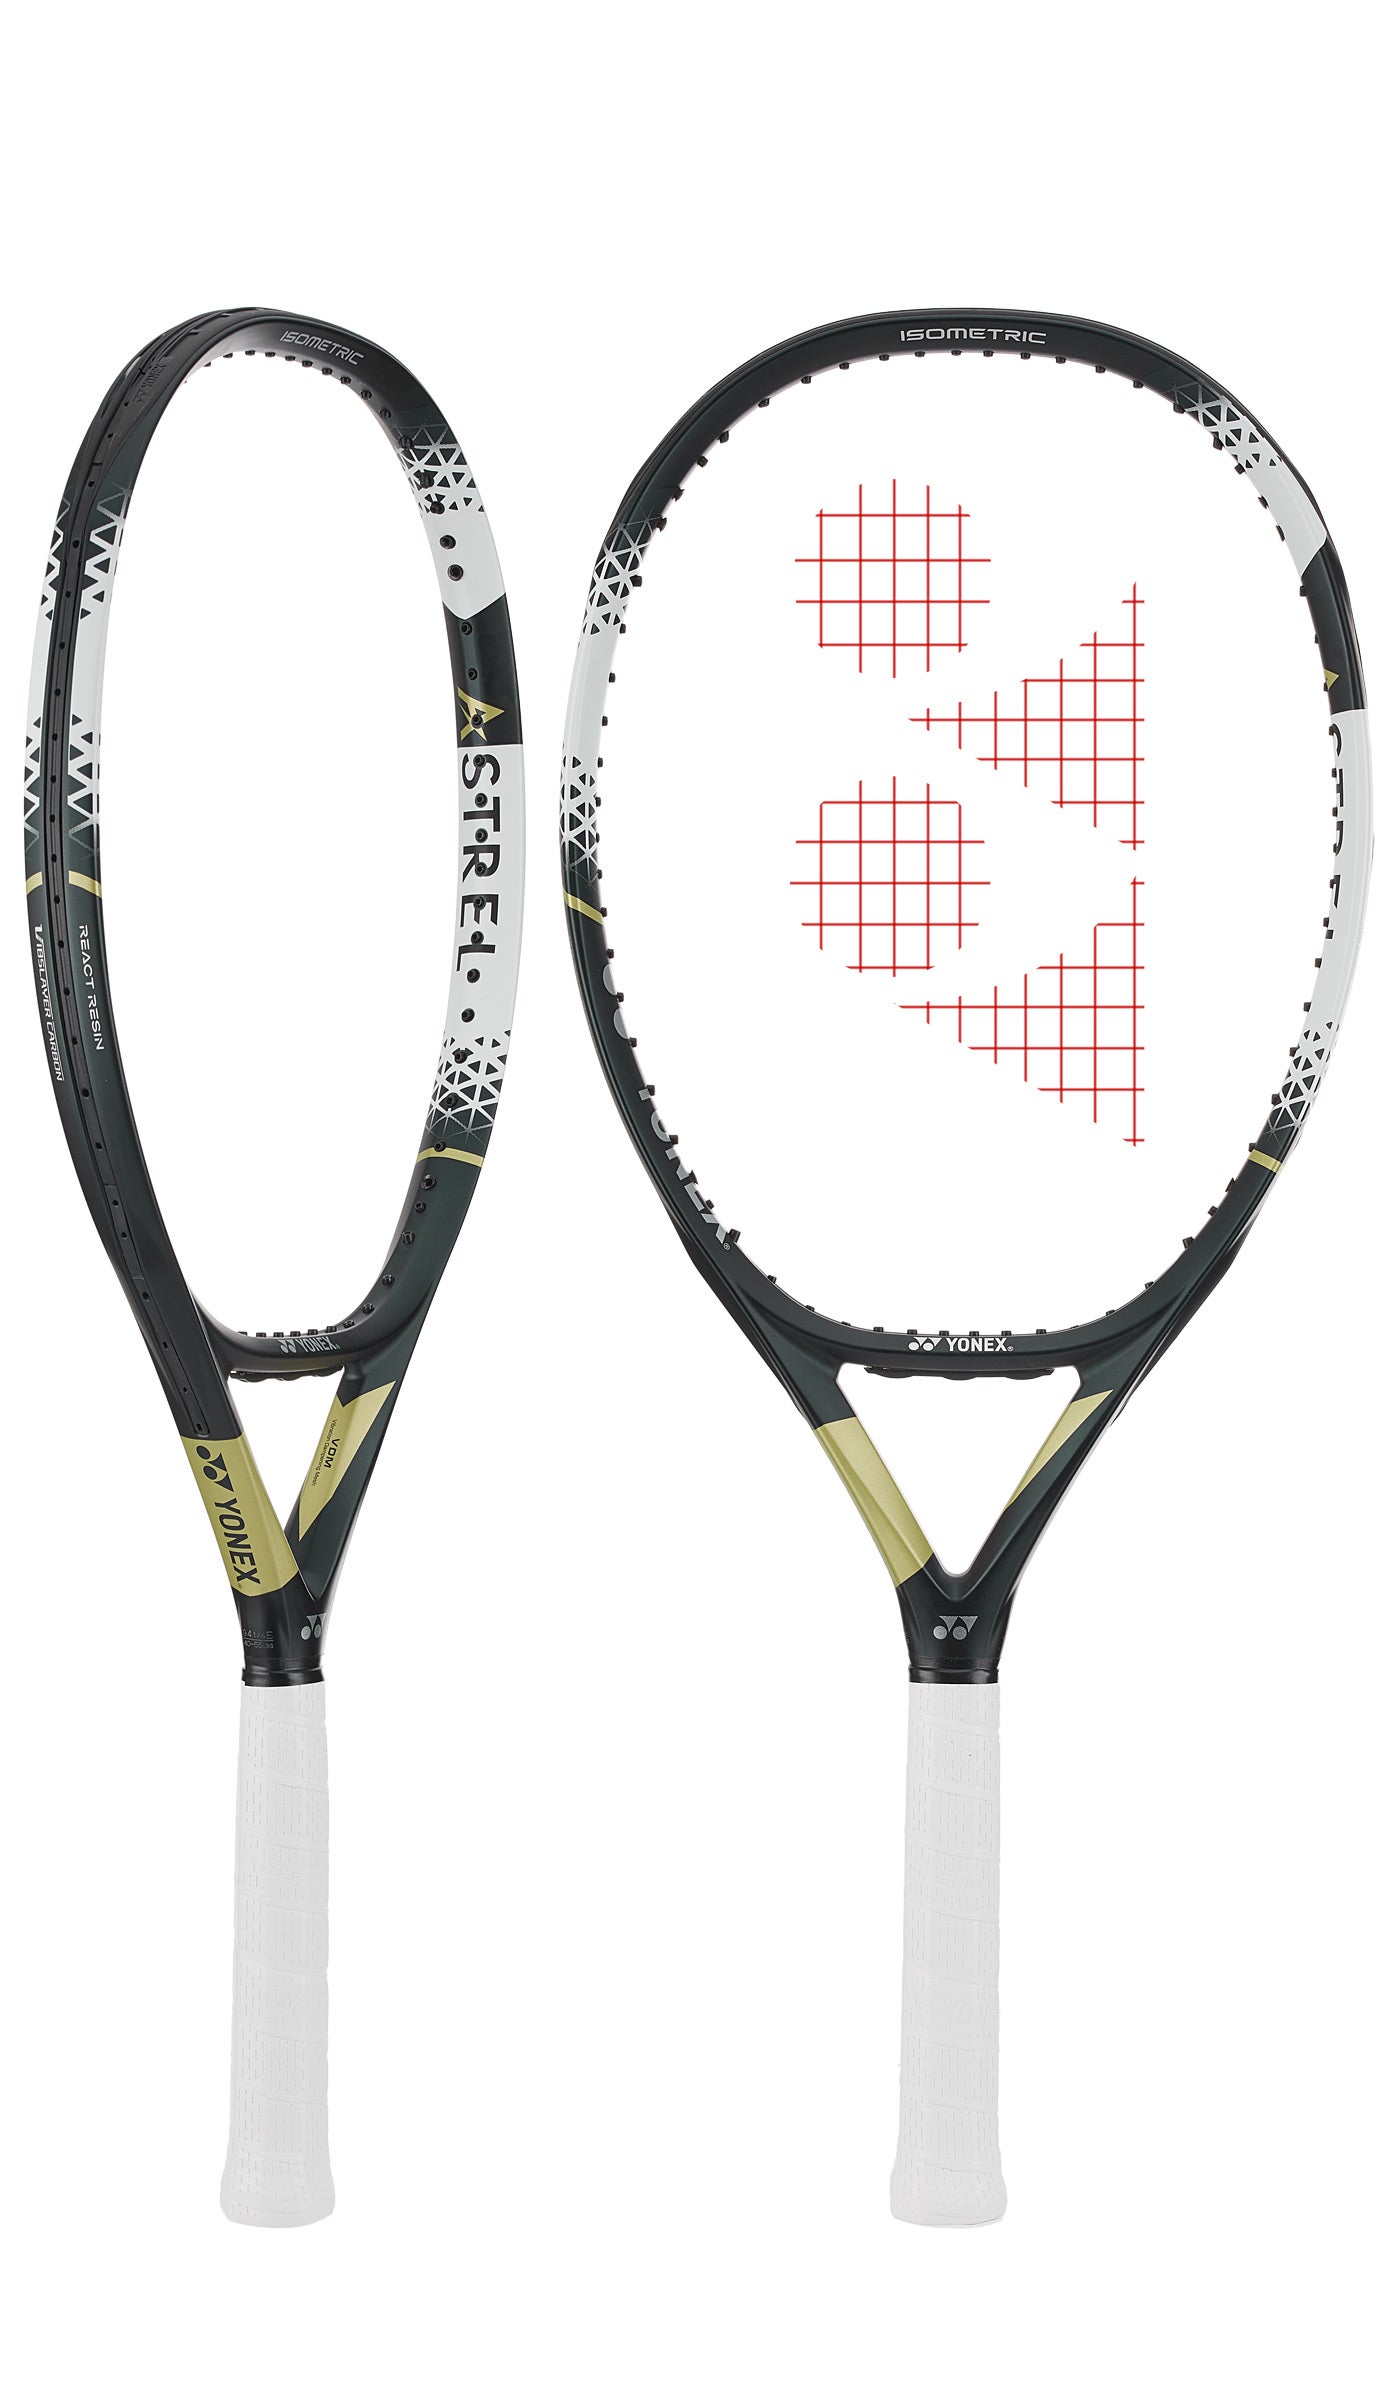 Details about   Yonex 2020 ASTREL 115 Tennis Racquet Racket 105sq 260g G2 16x17 with Cover 